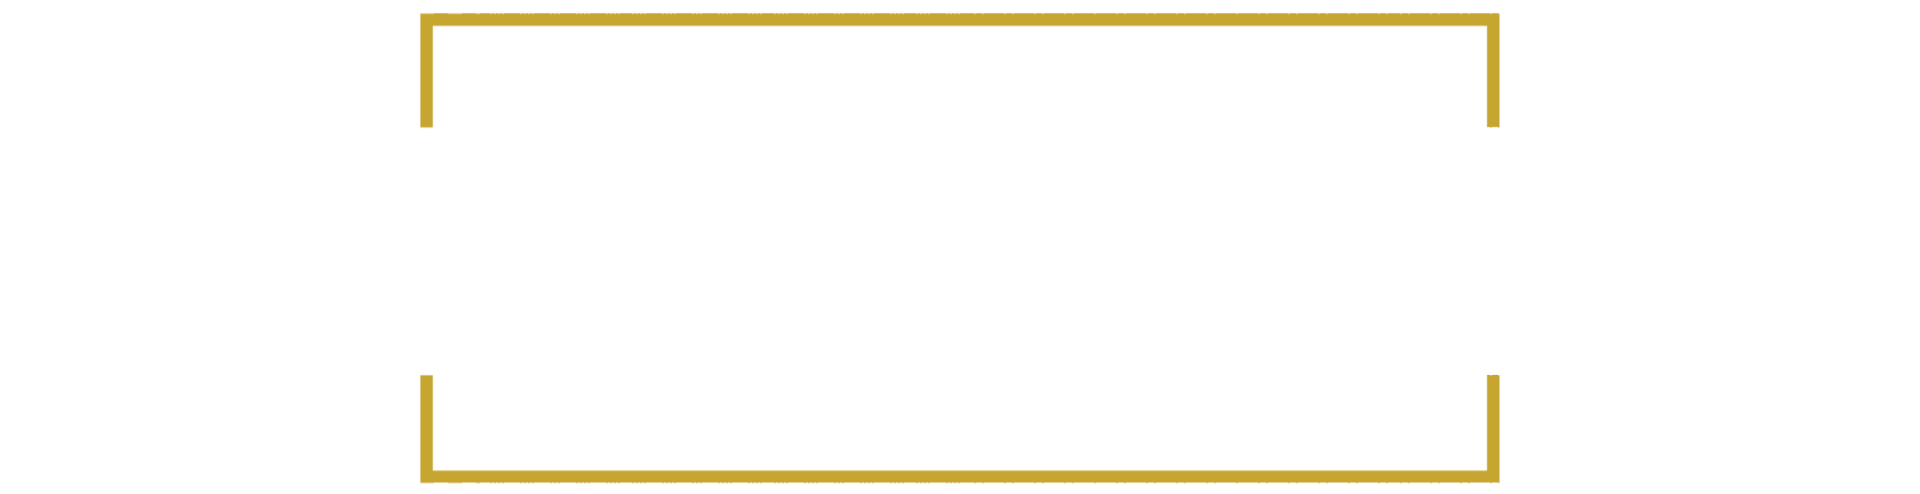 Romines Weis & young logo